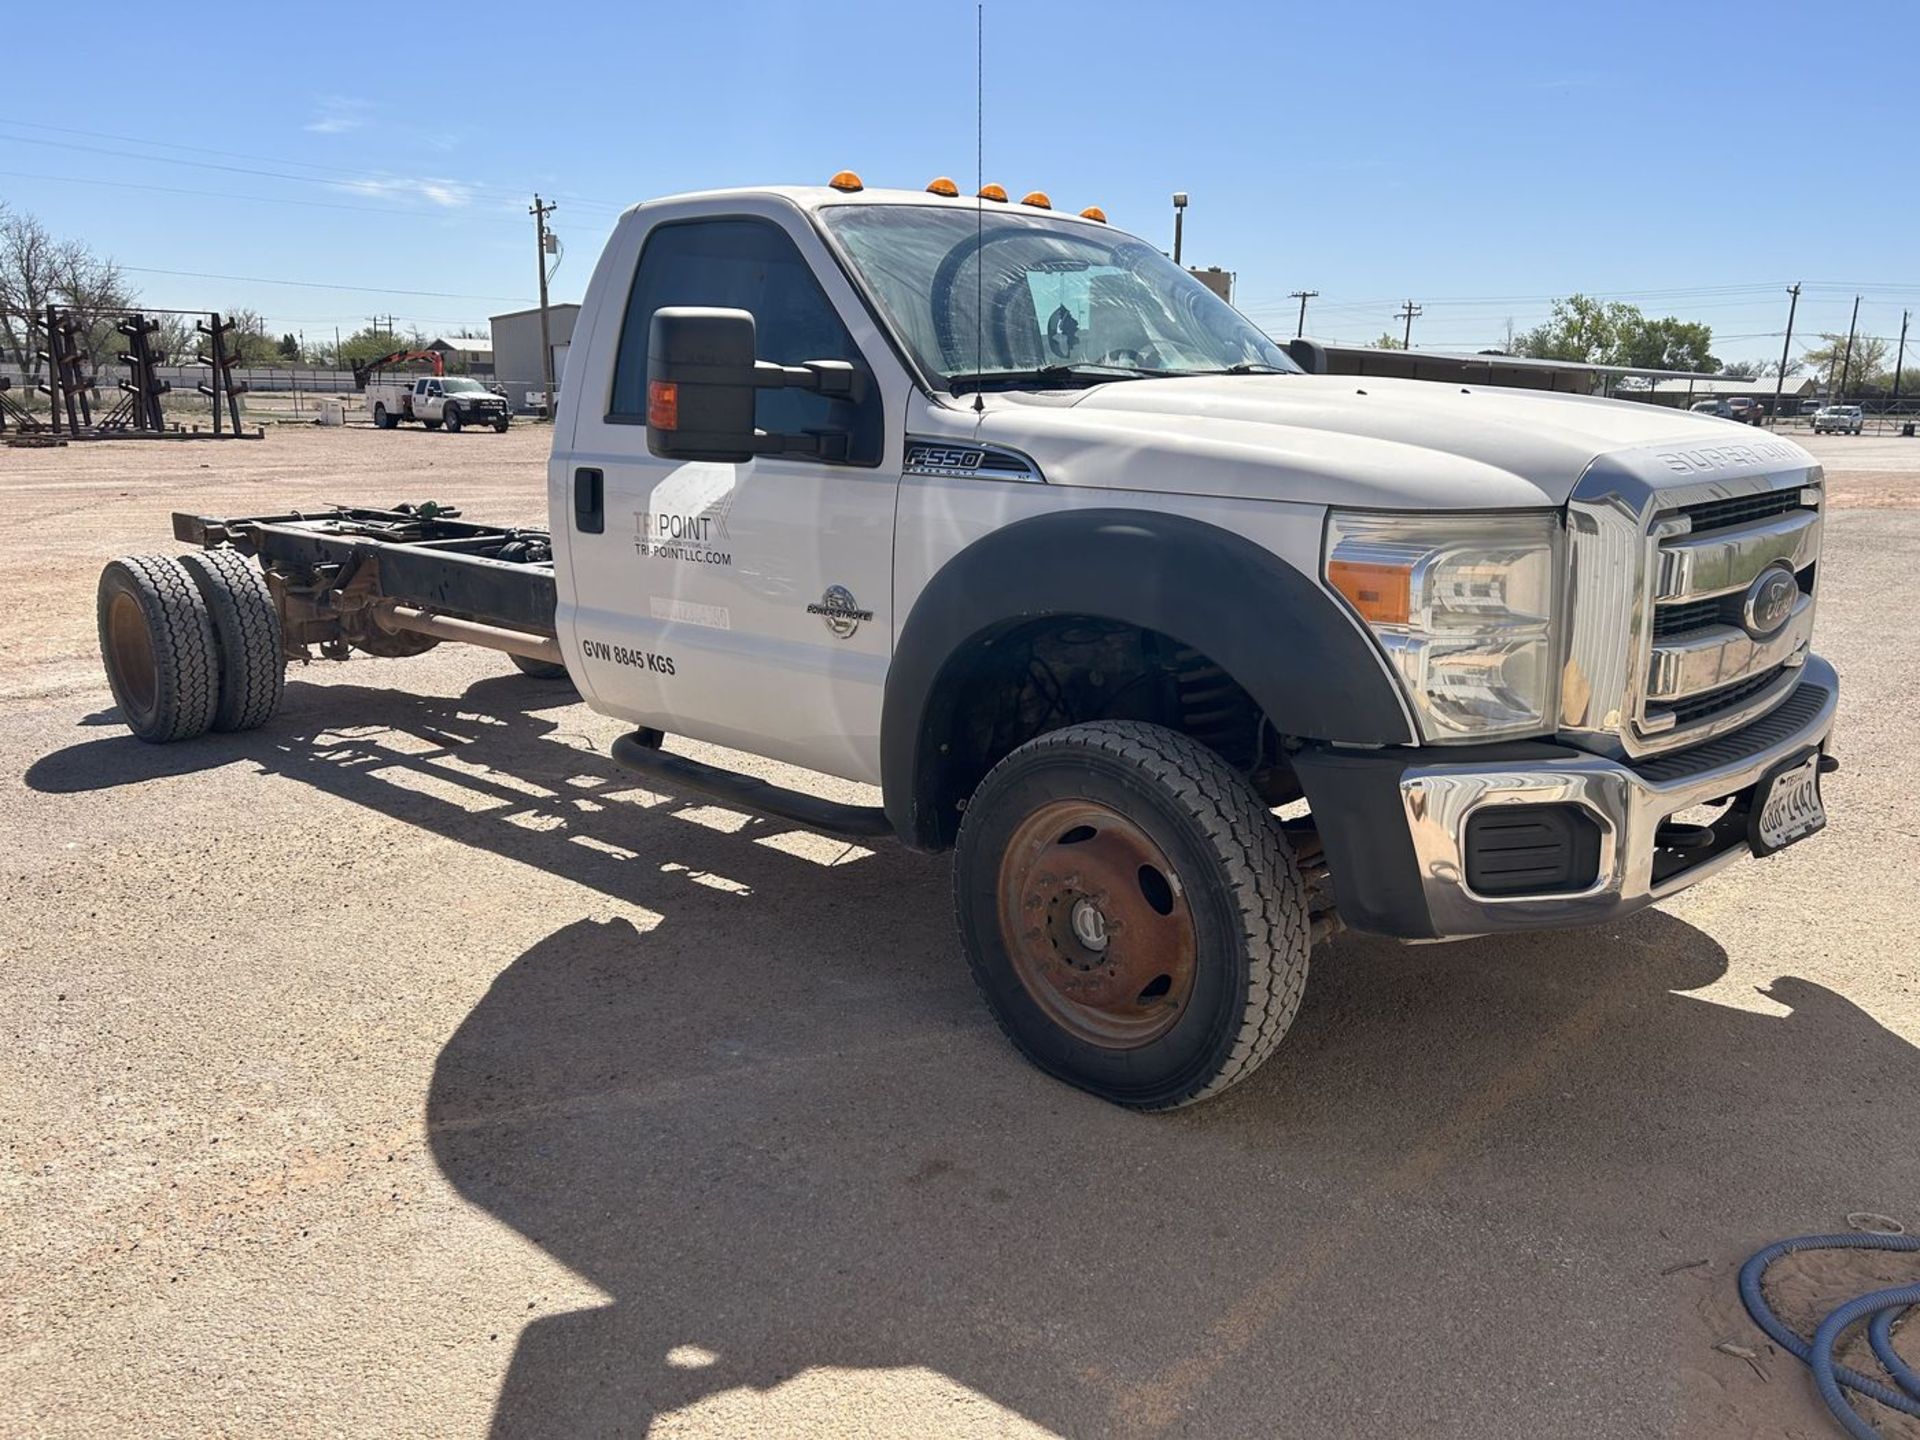 2012 Ford F-550 XLT Super Duty Regular Cab Truck Chassis, VIN: 1FDUF5HT5CEB01856; with 178 in. - Image 2 of 5